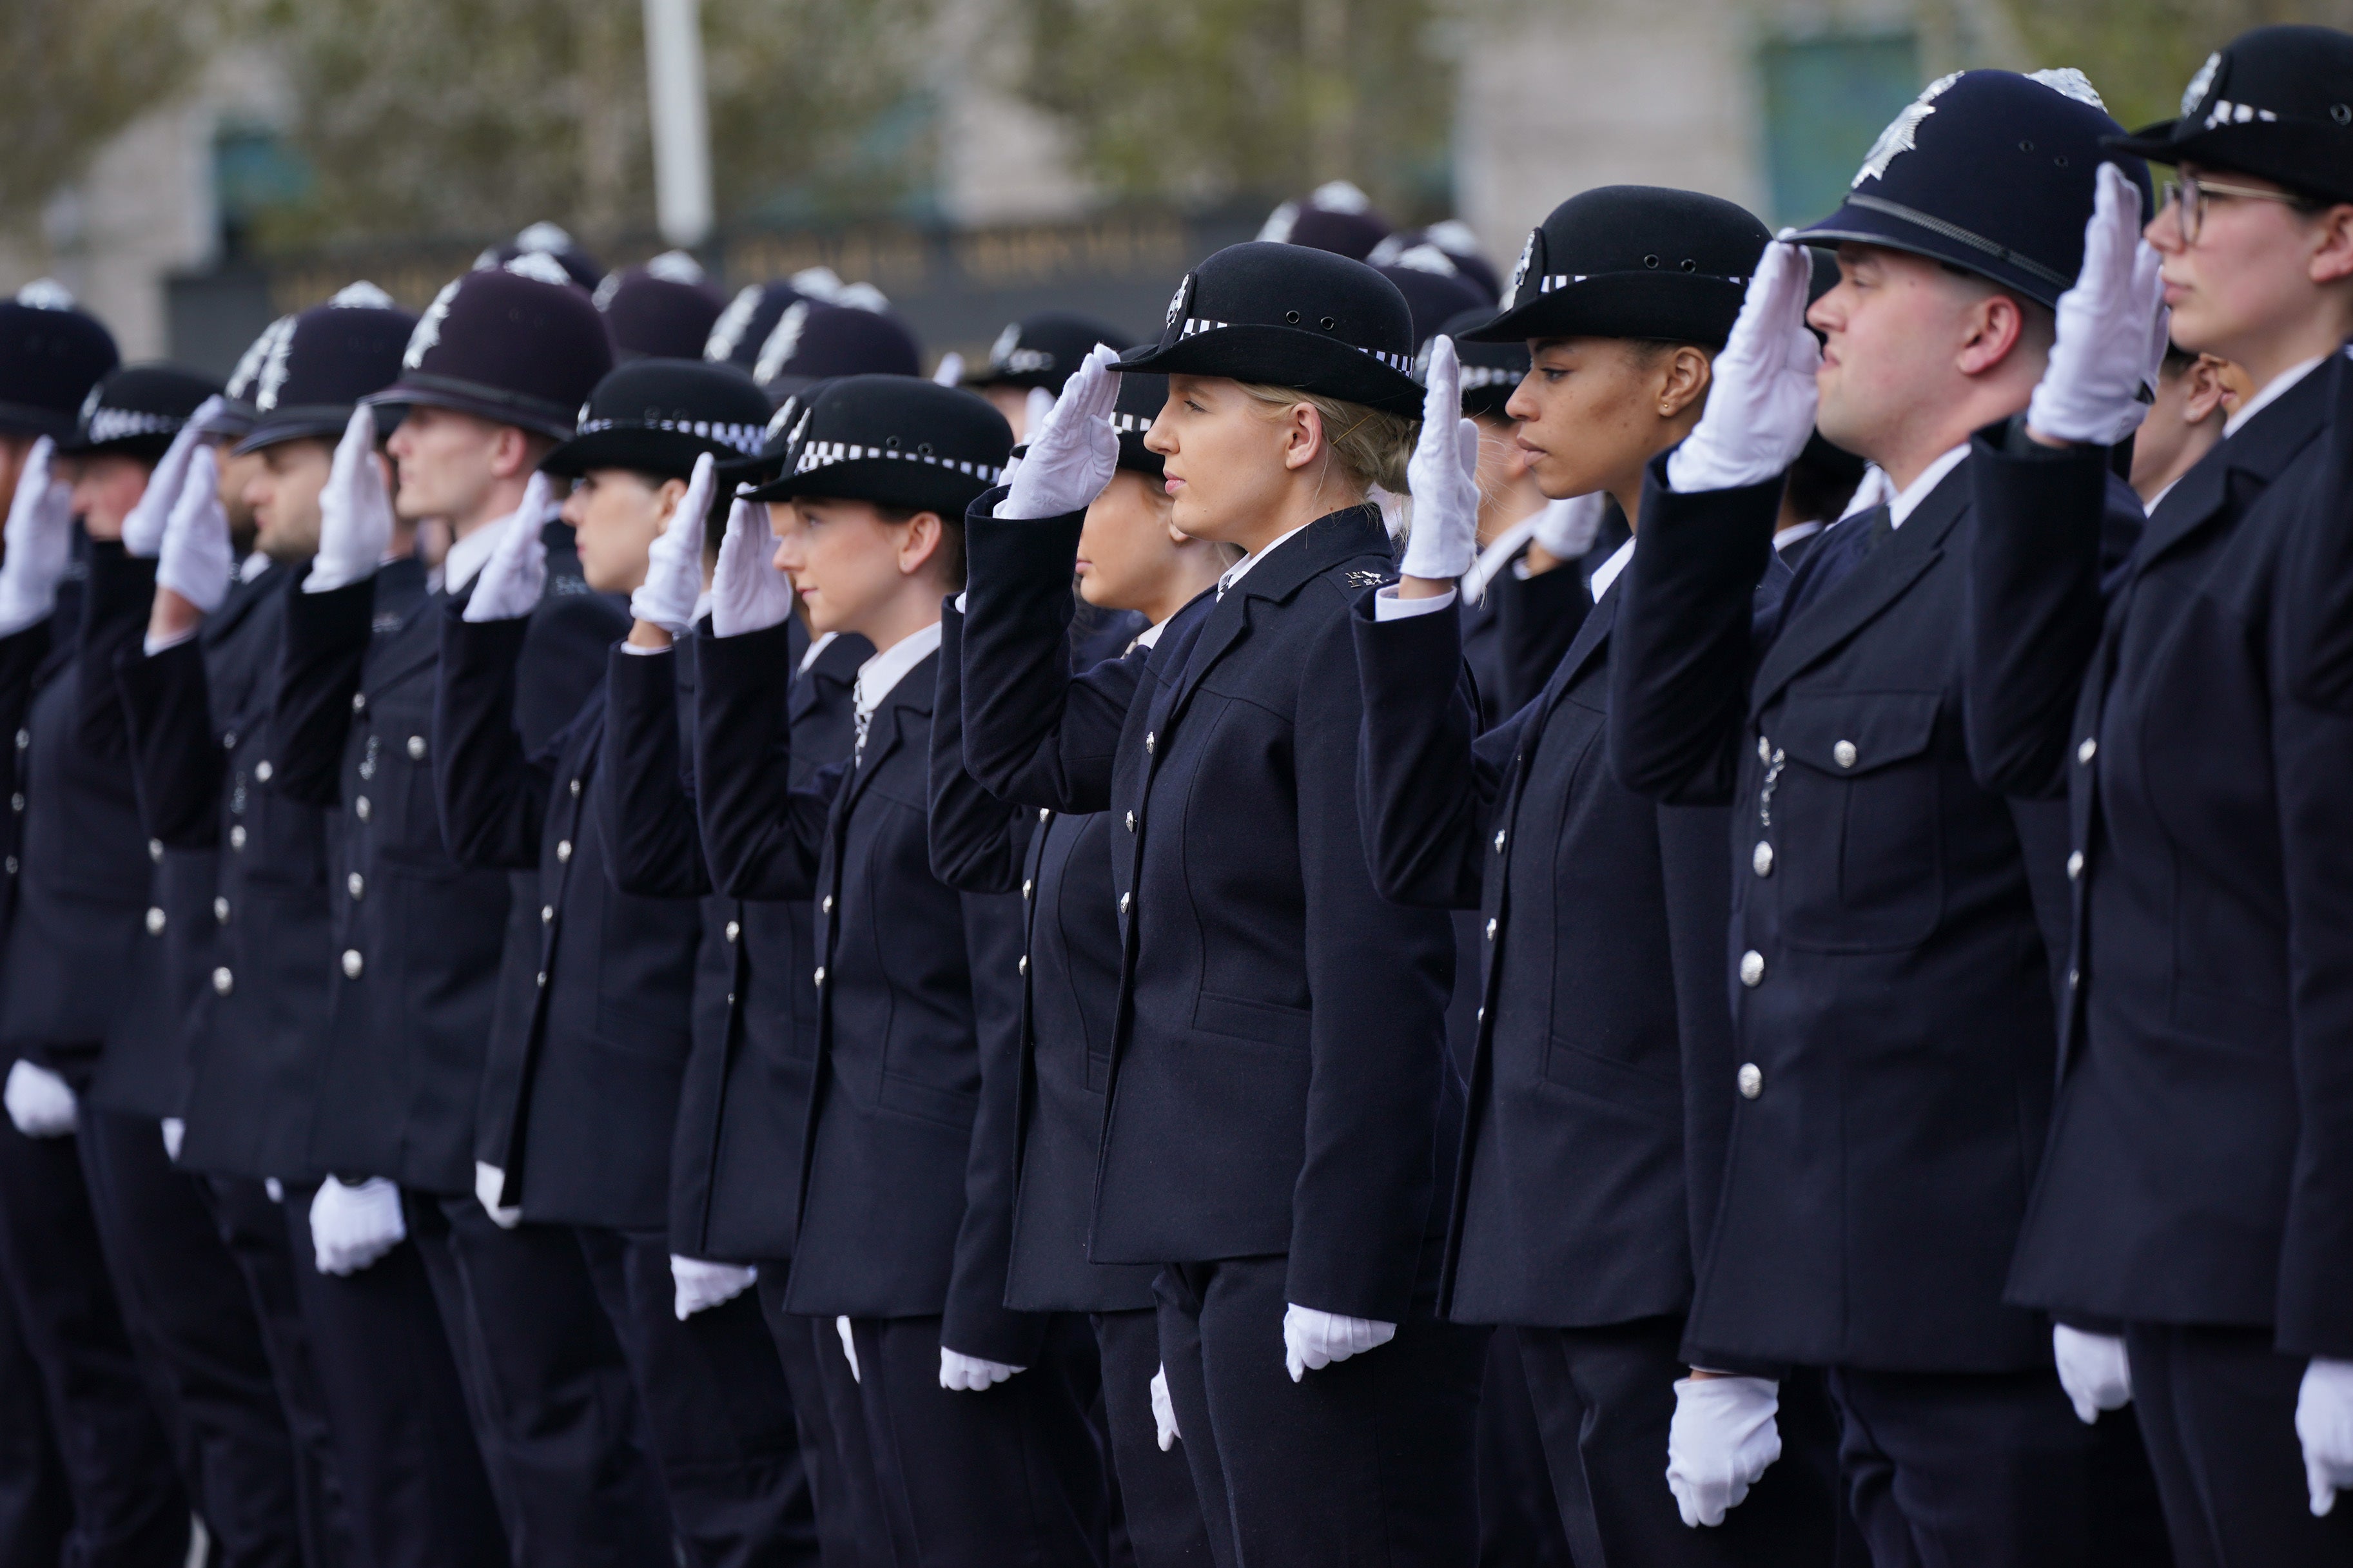 The Met Police joined five other forces